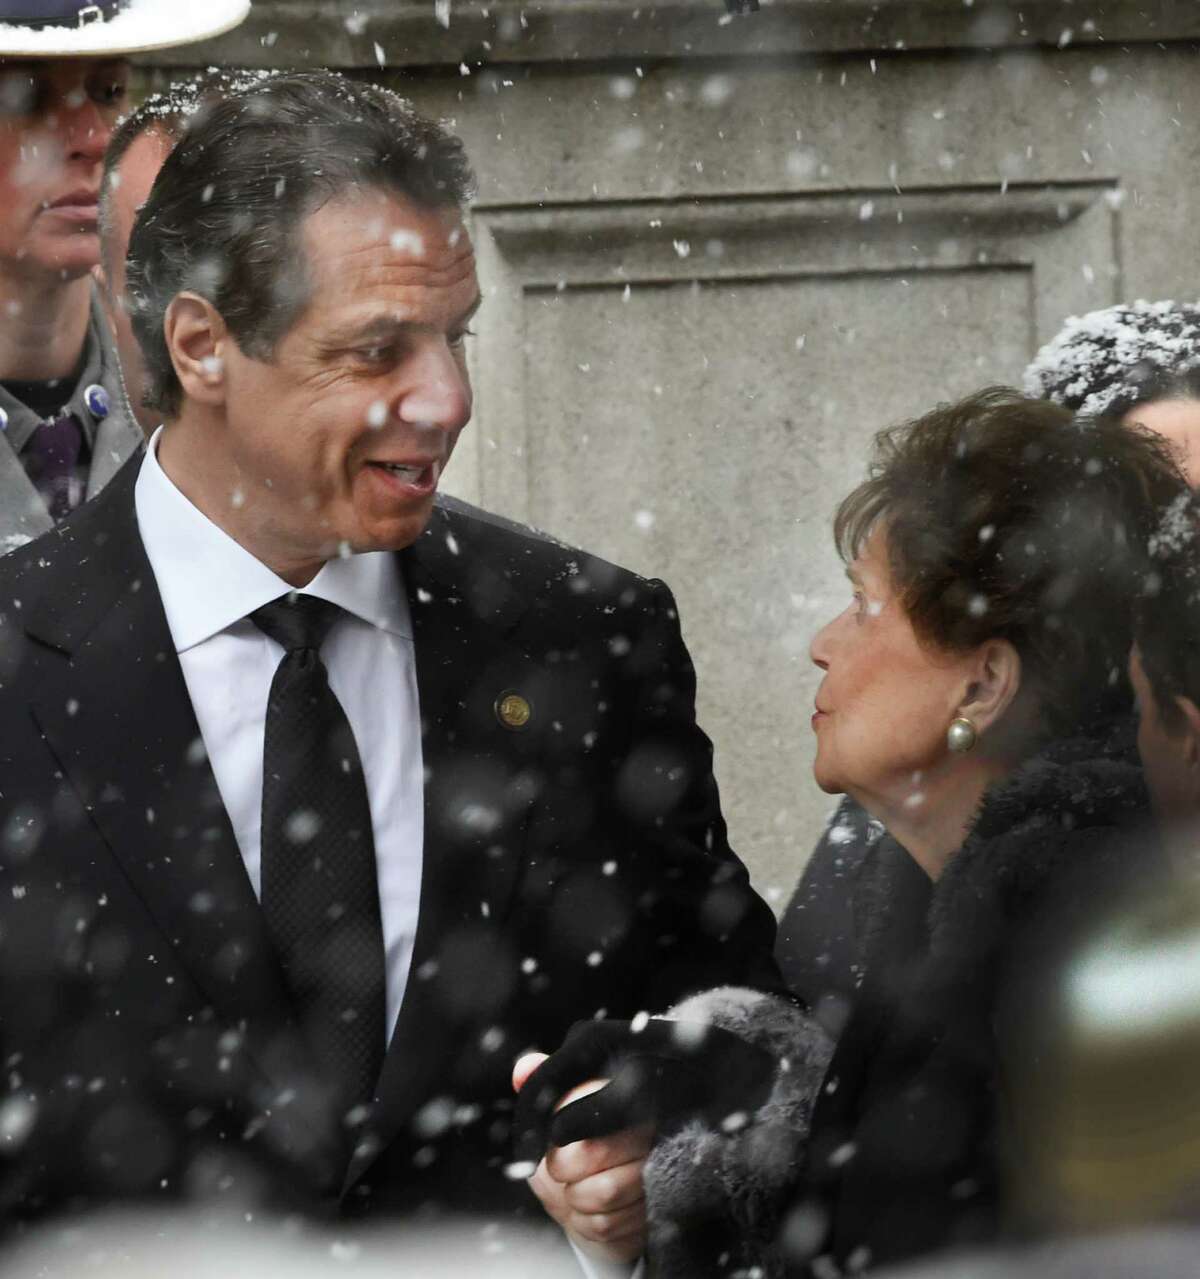 Gov. Andrew Cuomo gives his mother, Matilda Cuomo, a comforting smile as they arrive for the funeral of his father, former Governor Mario M. Cuomo, at St. Ignatius Loyola Church Tuesday morning, Jan. 6, 2015, in New York City, N.Y. (Skip Dickstein/Times Union)